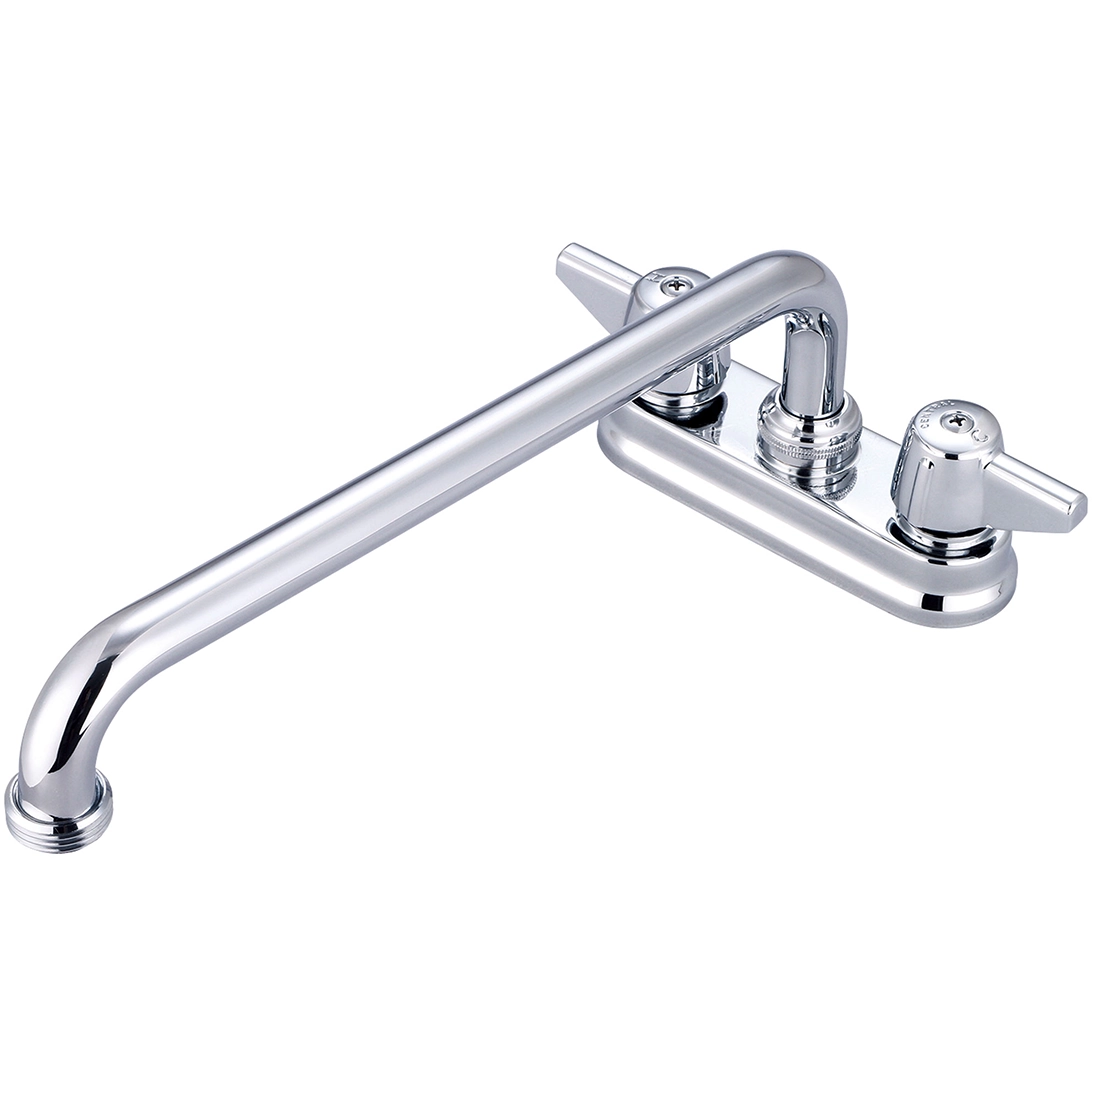 Two Handle Shell Type Bar/Laundry Faucet Model# 0094-H3